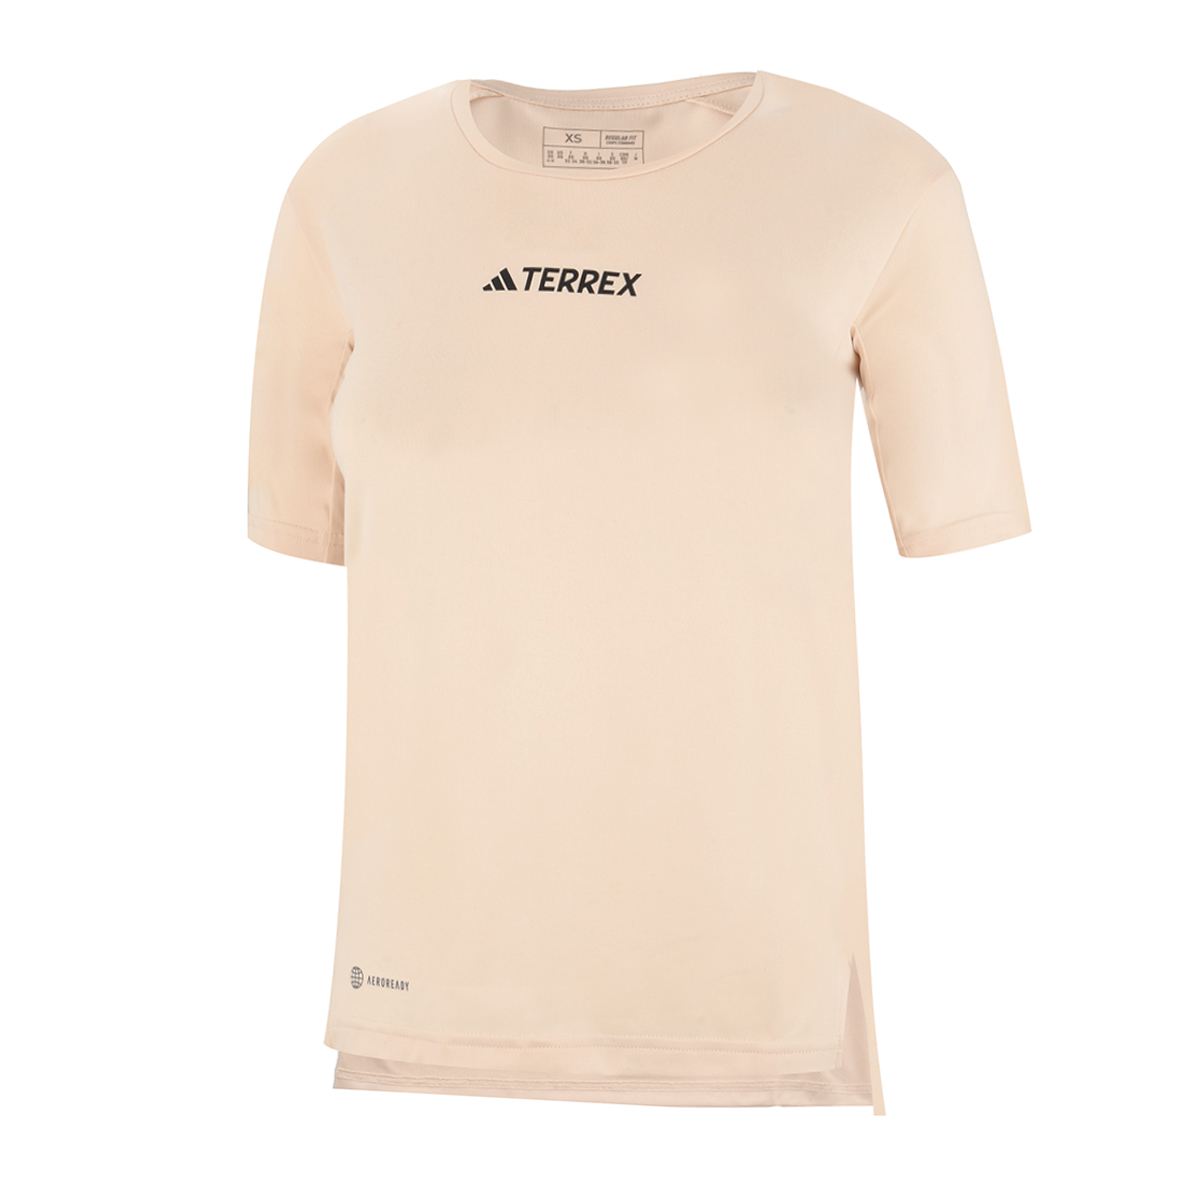 Remera Outdoor adidas Terrex Multi Mujer,  image number null